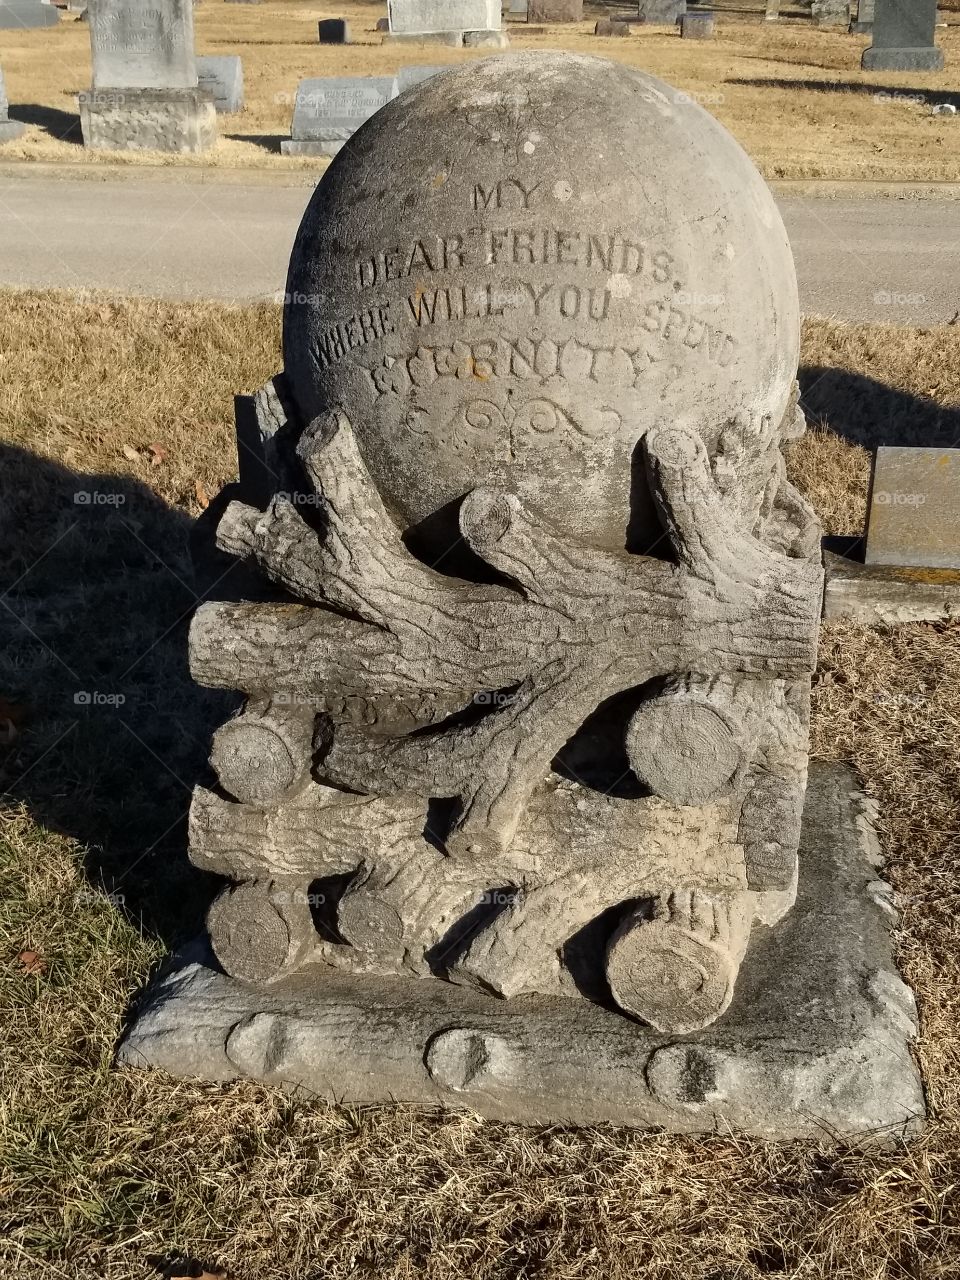 A unique and interesting tomb stone.  Warrensburg Missouri.
"My dear friends where will you spend eternity?"